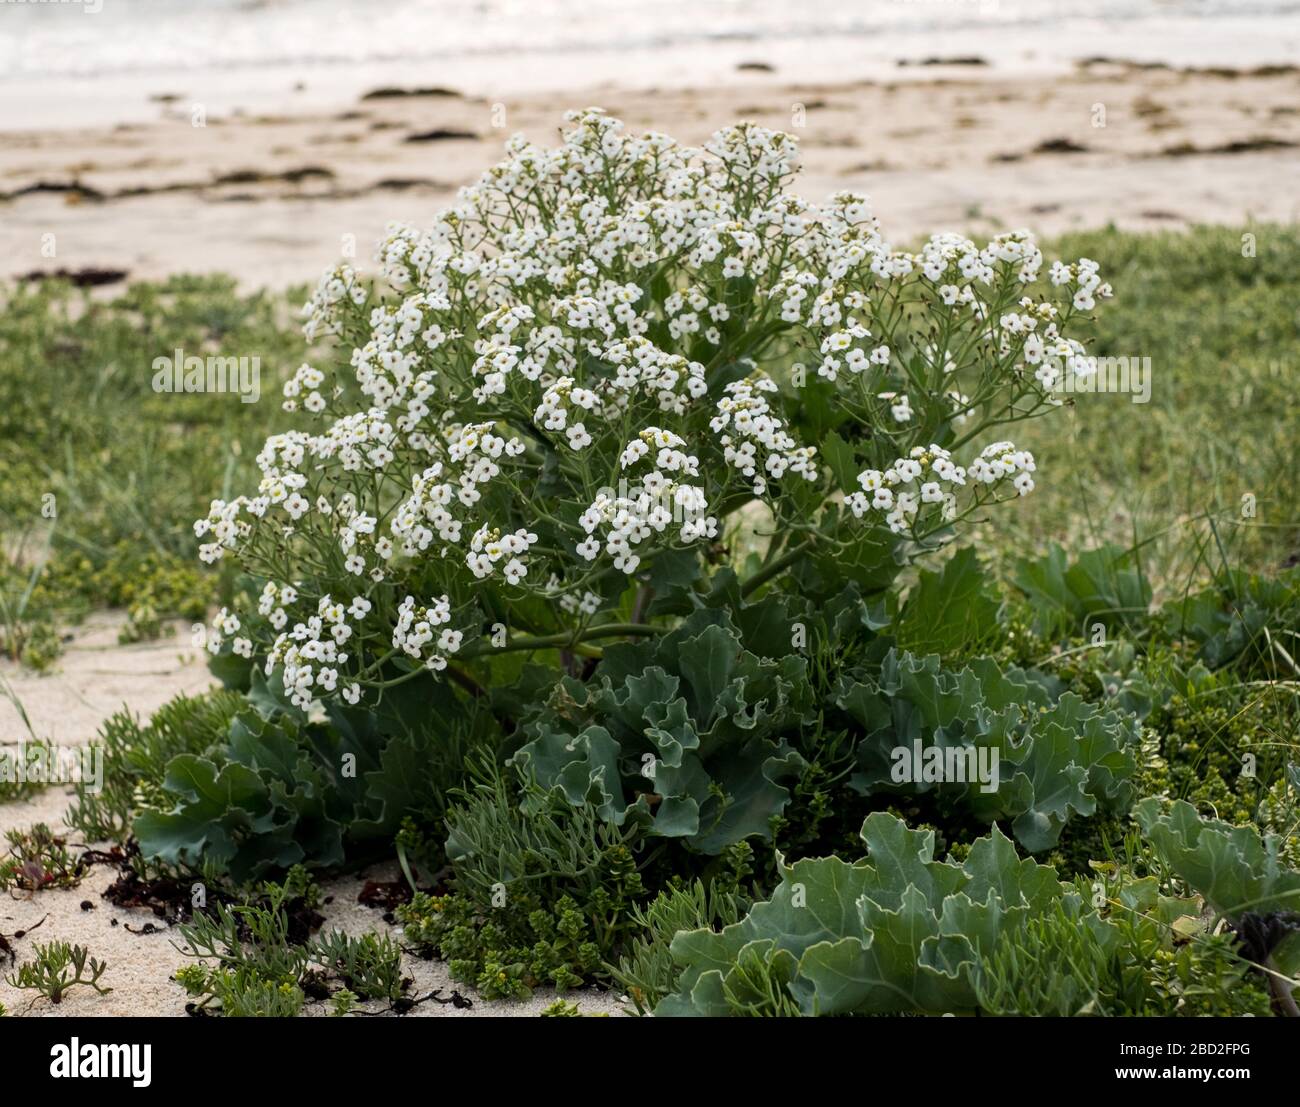 Sea cabbage on the beach of St Agnes, Isles of Scilly Stock Photo